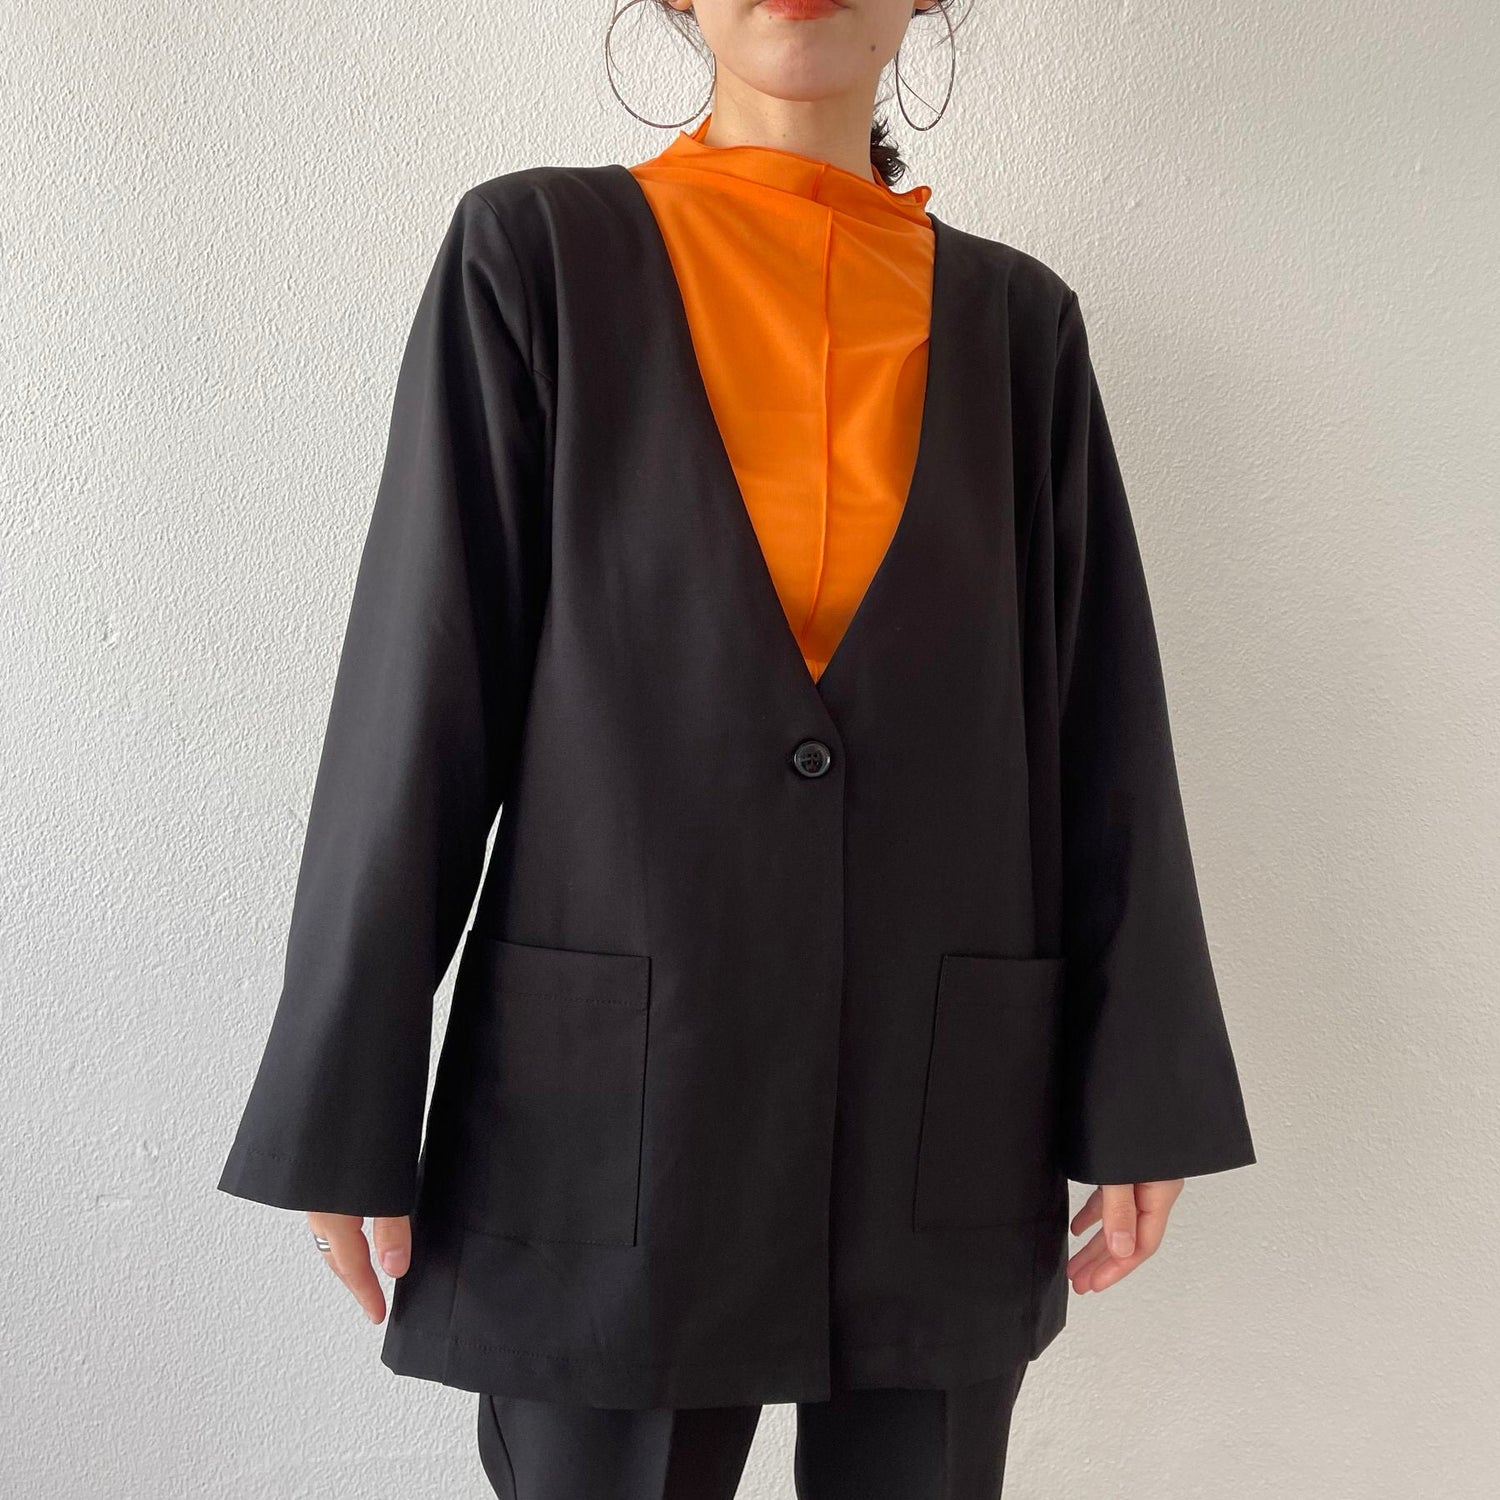 perfect silhouette no collar jacket / black